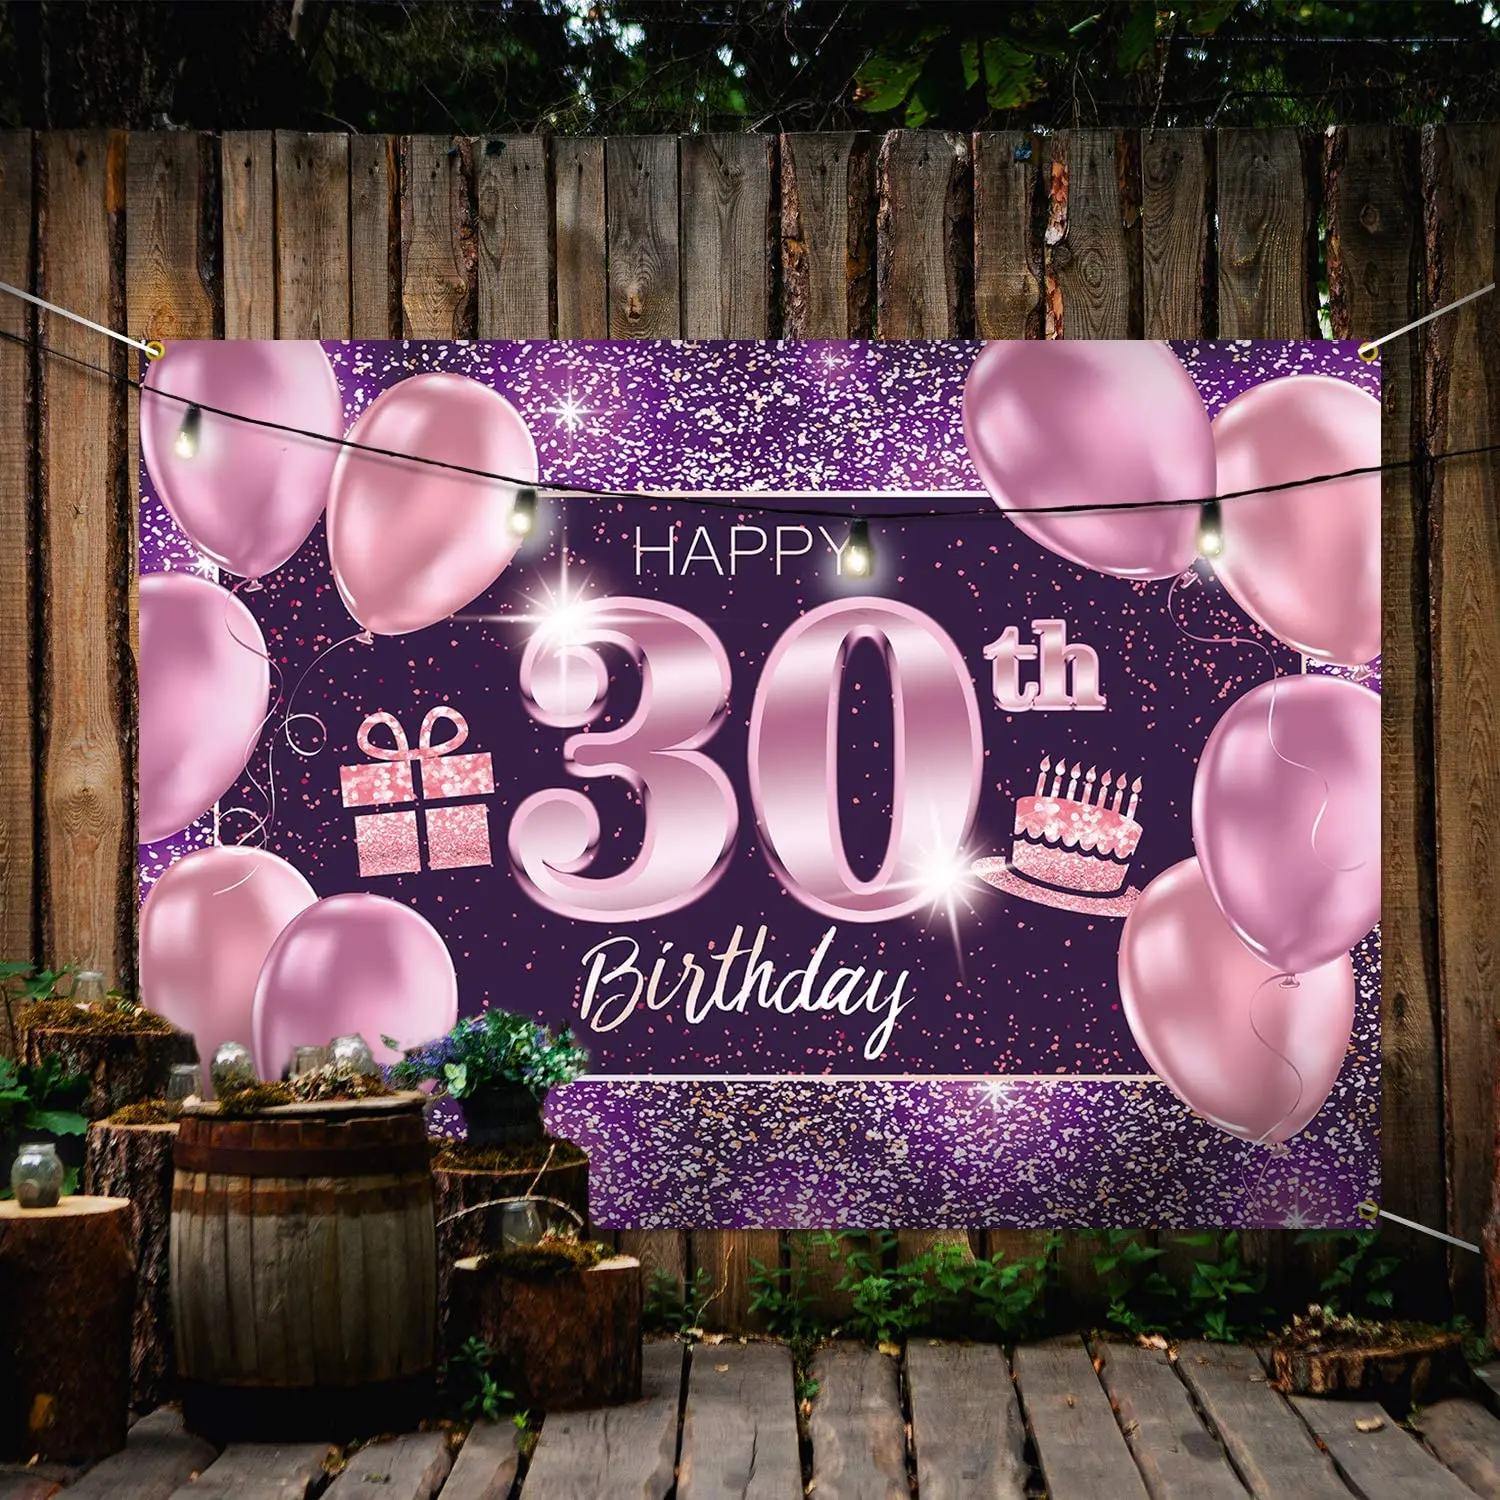 30th Birthday Decorations for Men Blue Gold Party Decorations with Birthday Banner Home Decorations